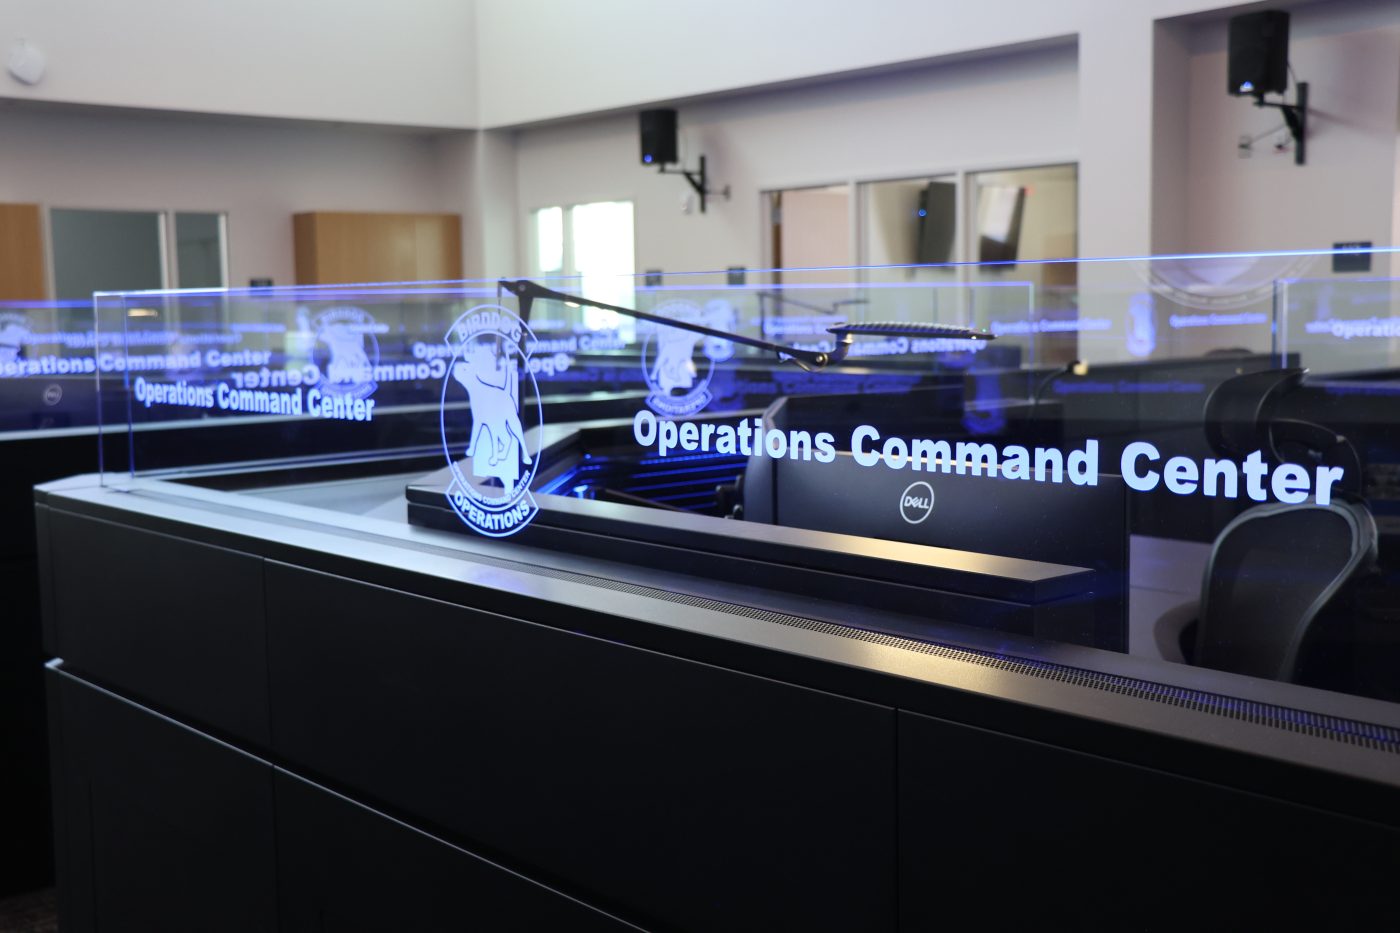 Clear sign above a work station with blue backlight that says Operations Command Center and has a dog logo next to it